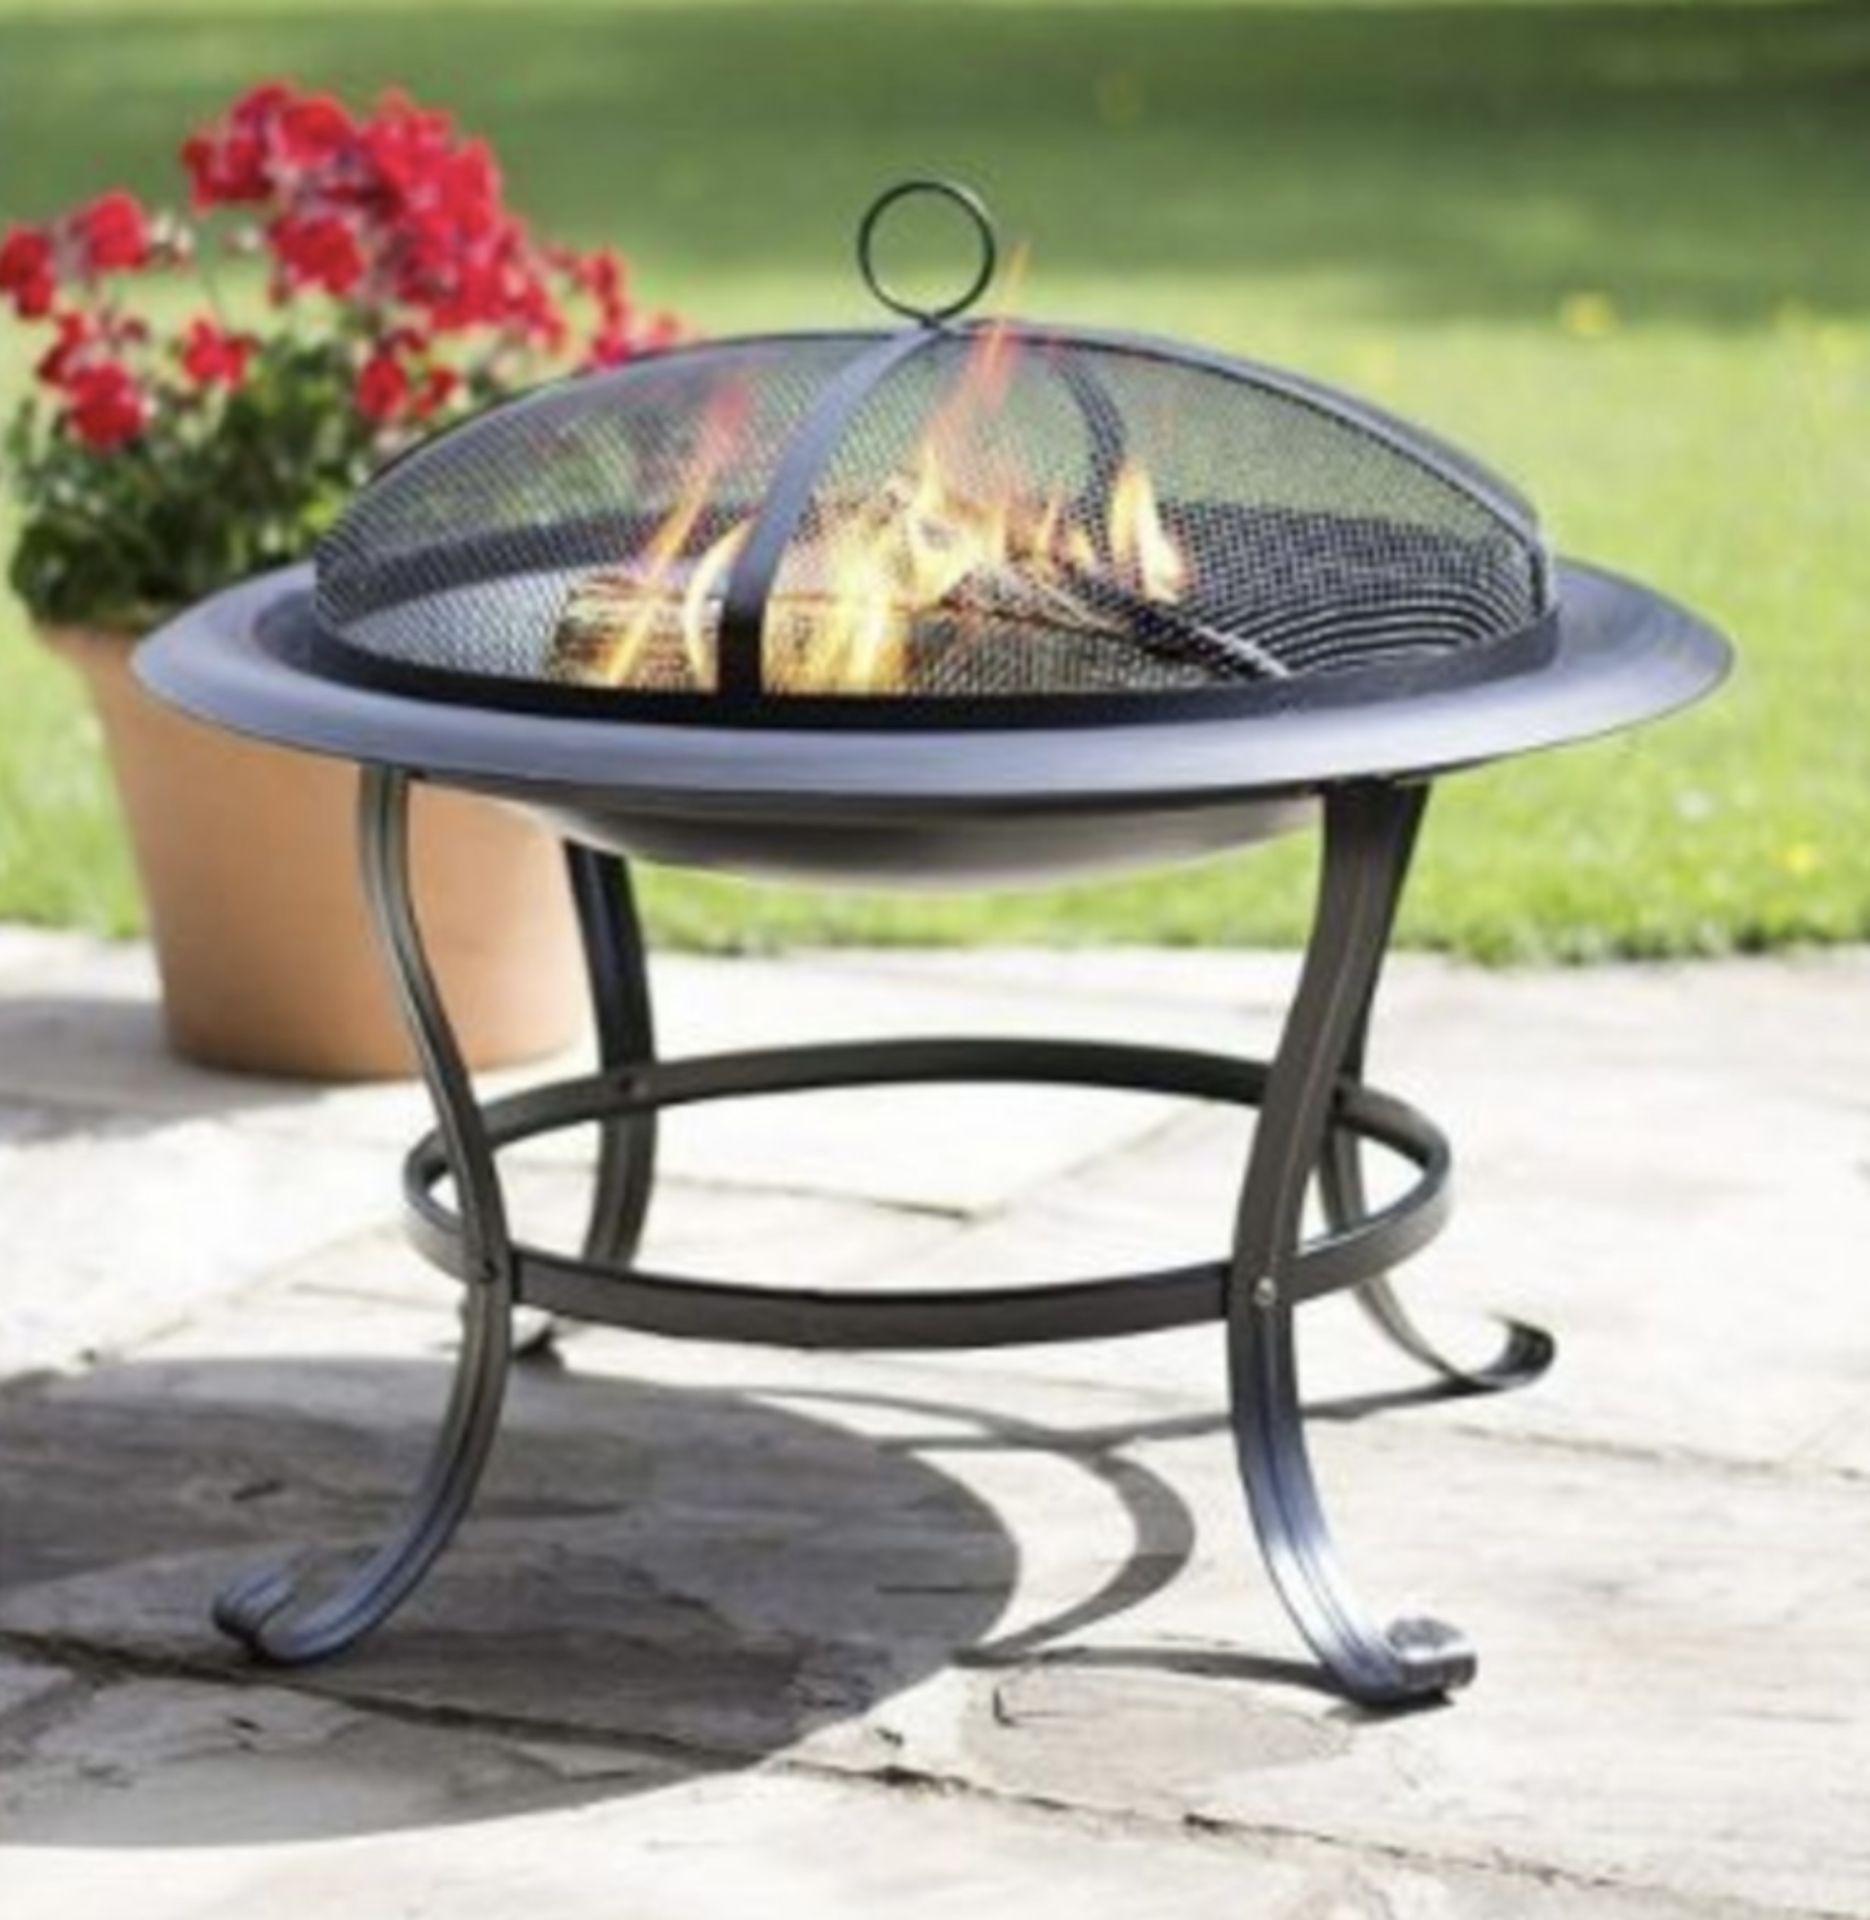 Steel Fire Pit Bowl - New and boxed